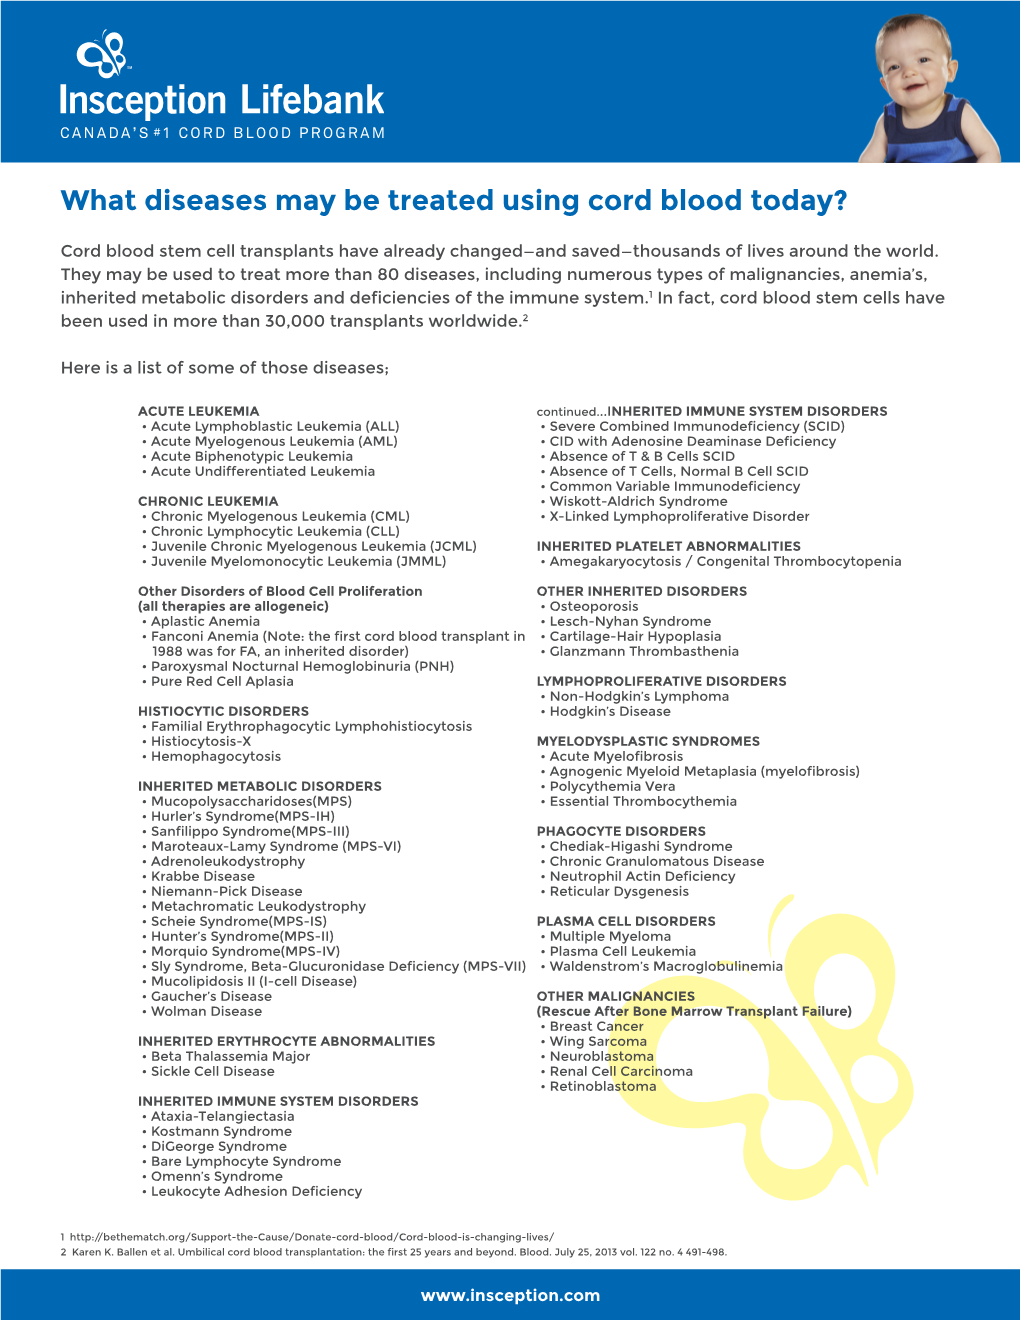 What Diseases May Be Treated Using Cord Blood Today?